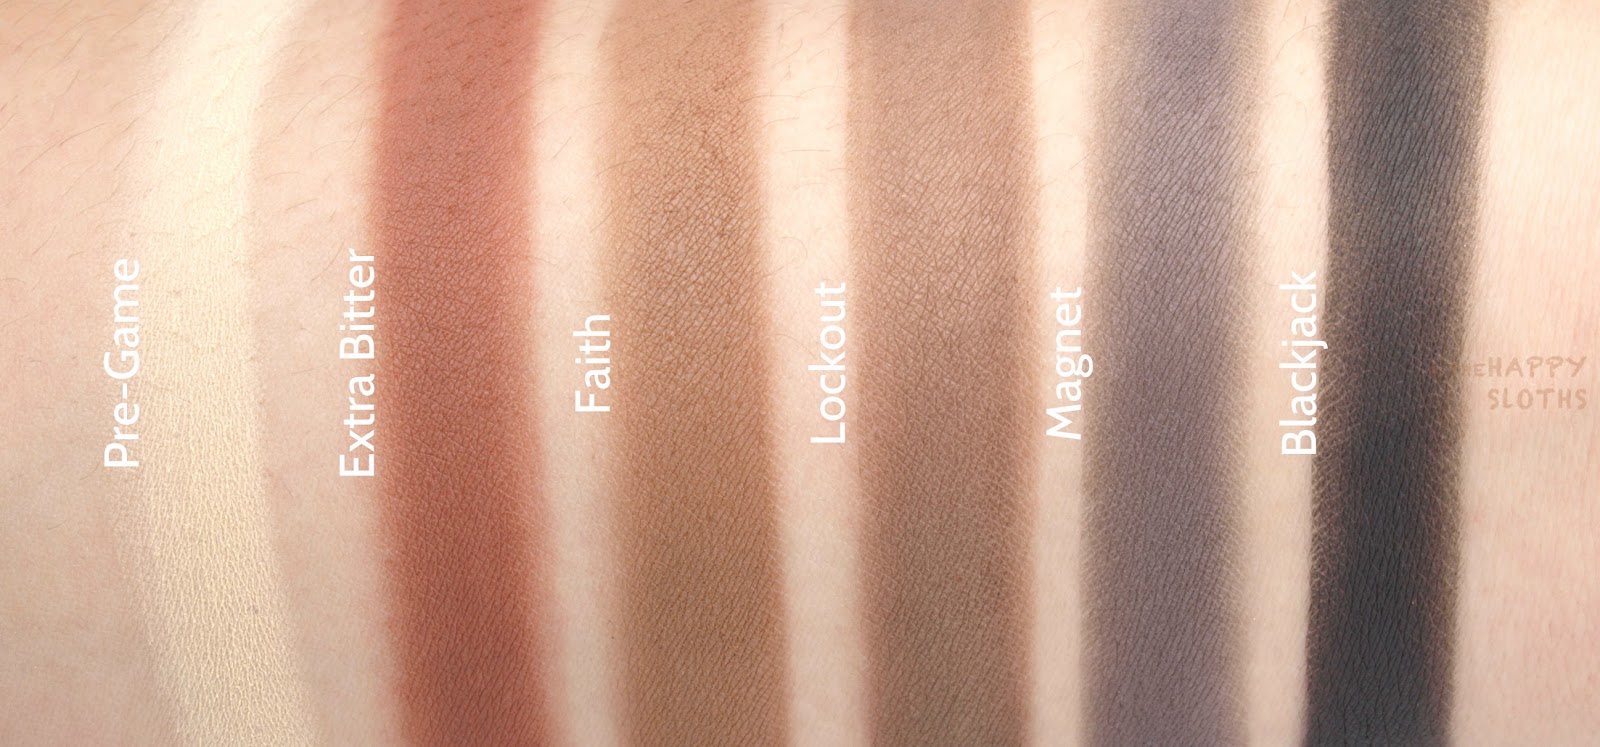 Urban Decay Naked Ultimate Basics Review and Swatches